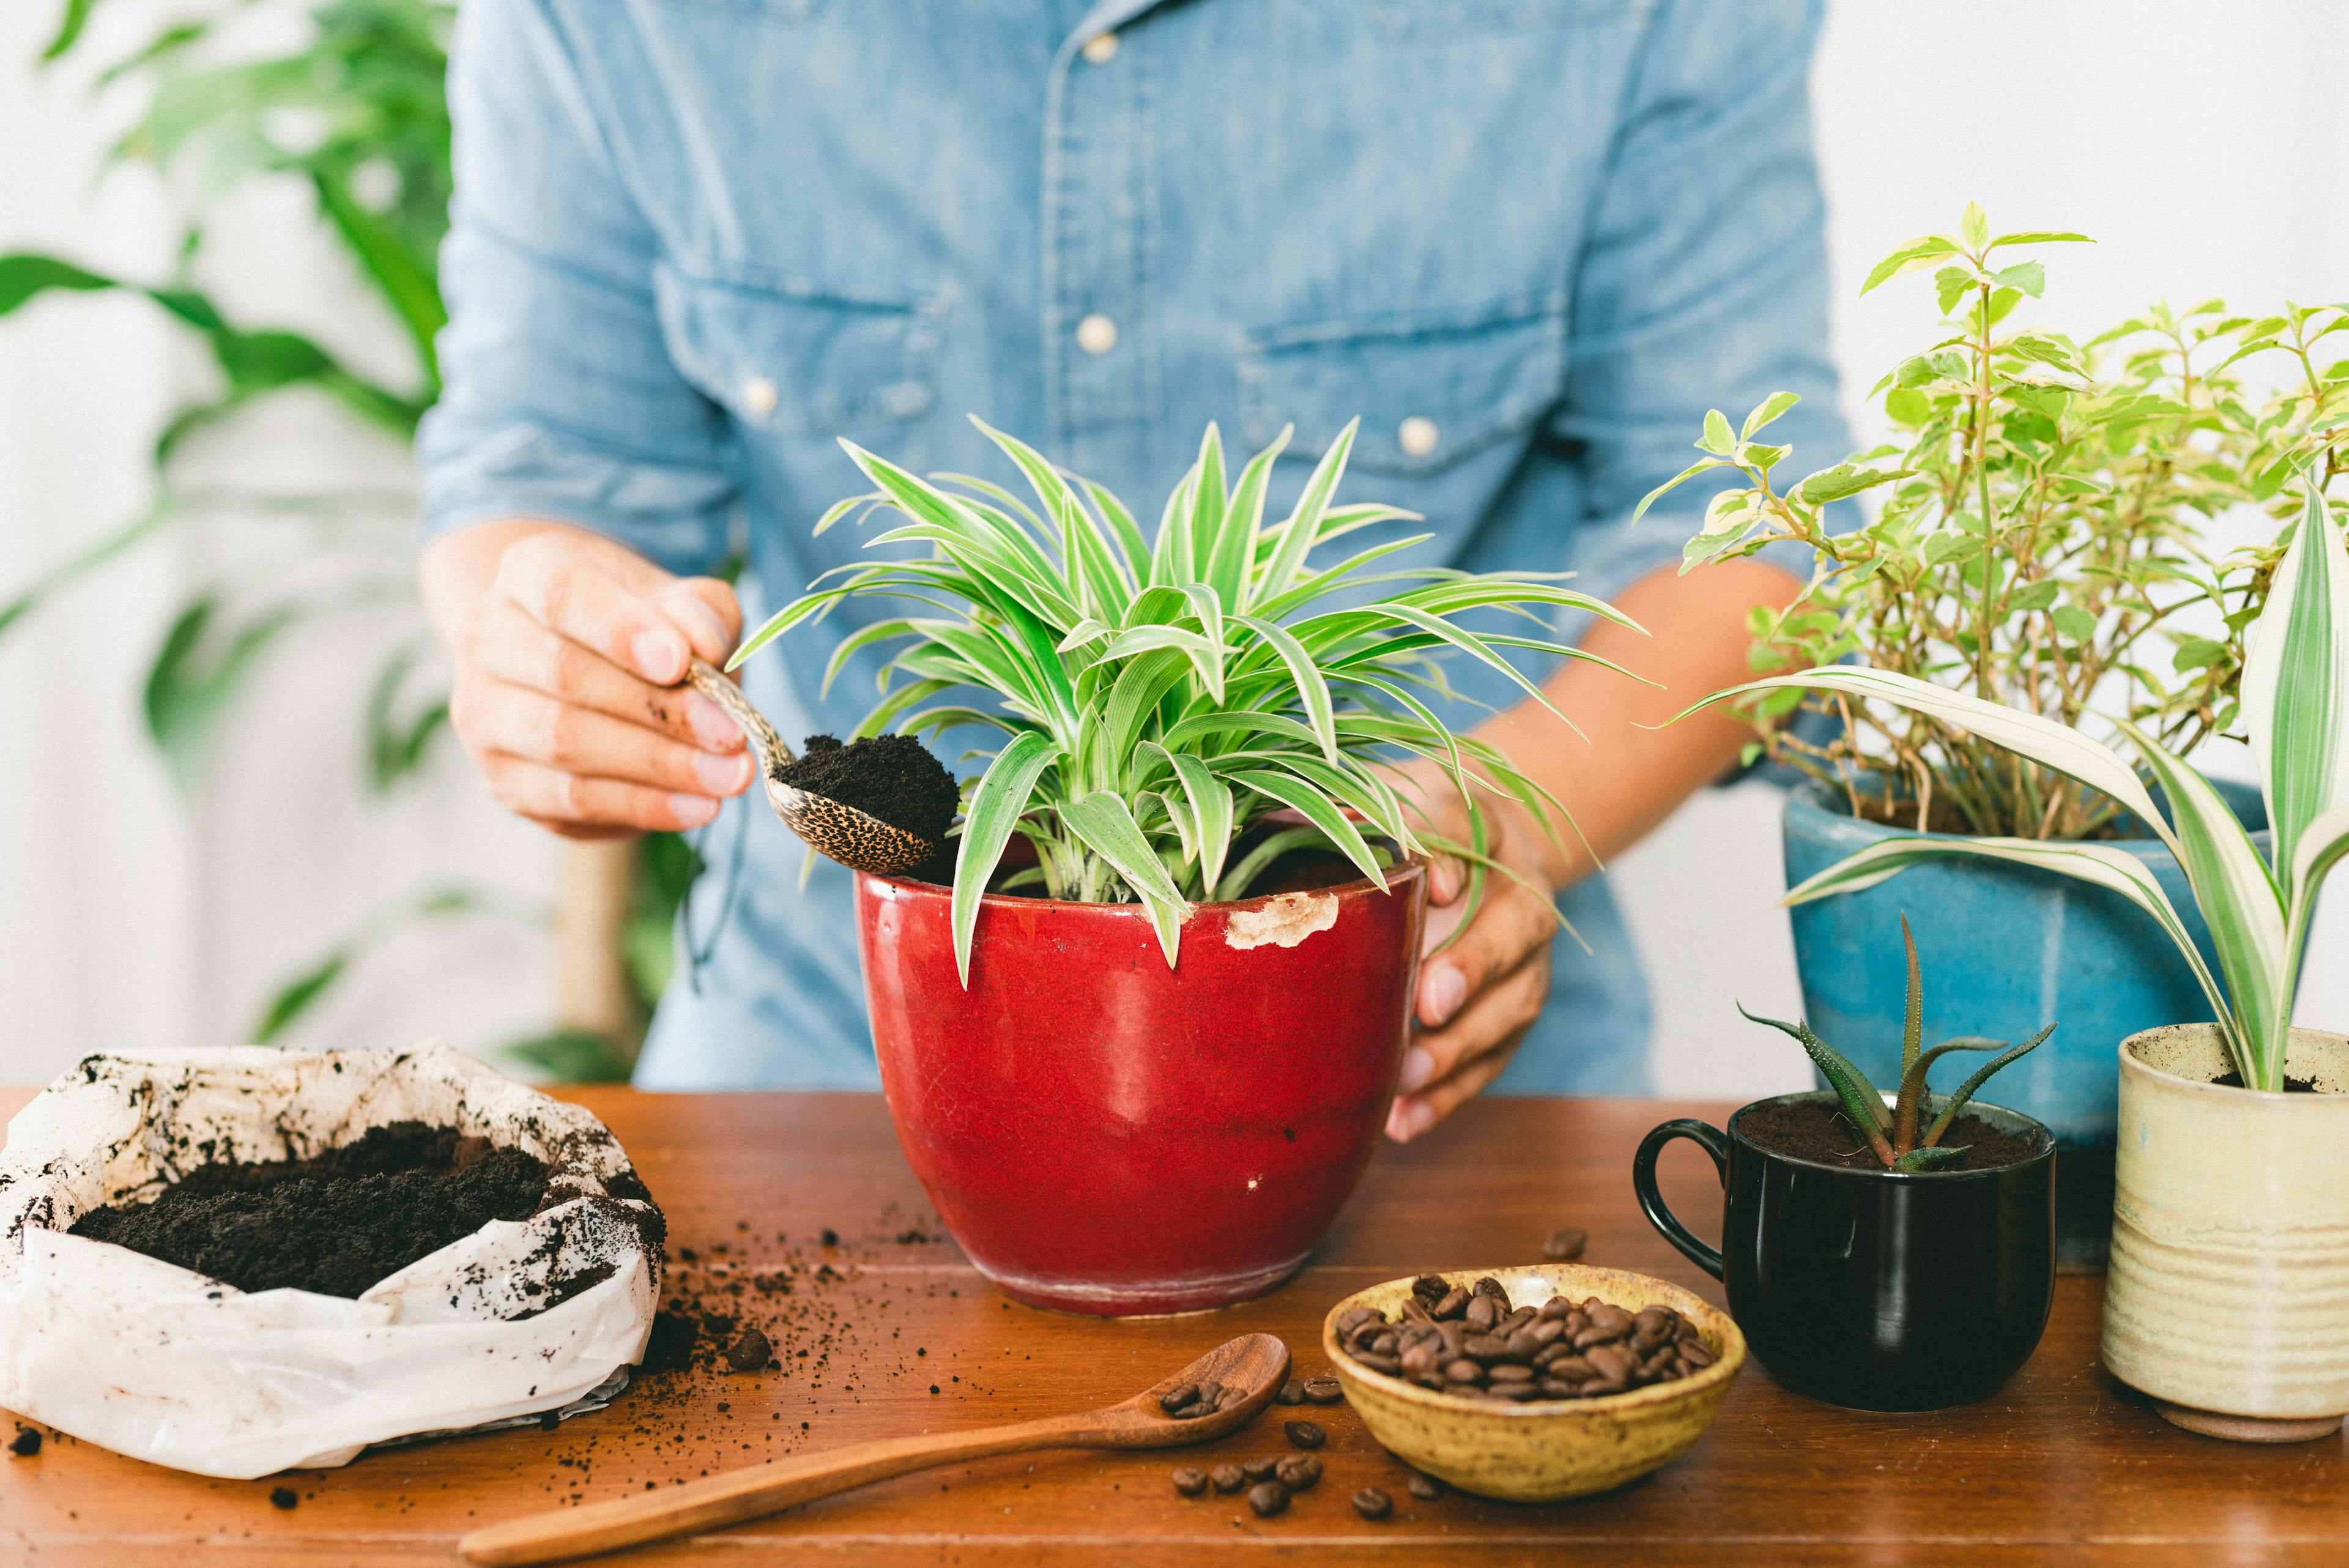 A person in a blue button up shirt is standing at a wooden table with plants, coffee grounds and soil to repot plants using coffee grounds.